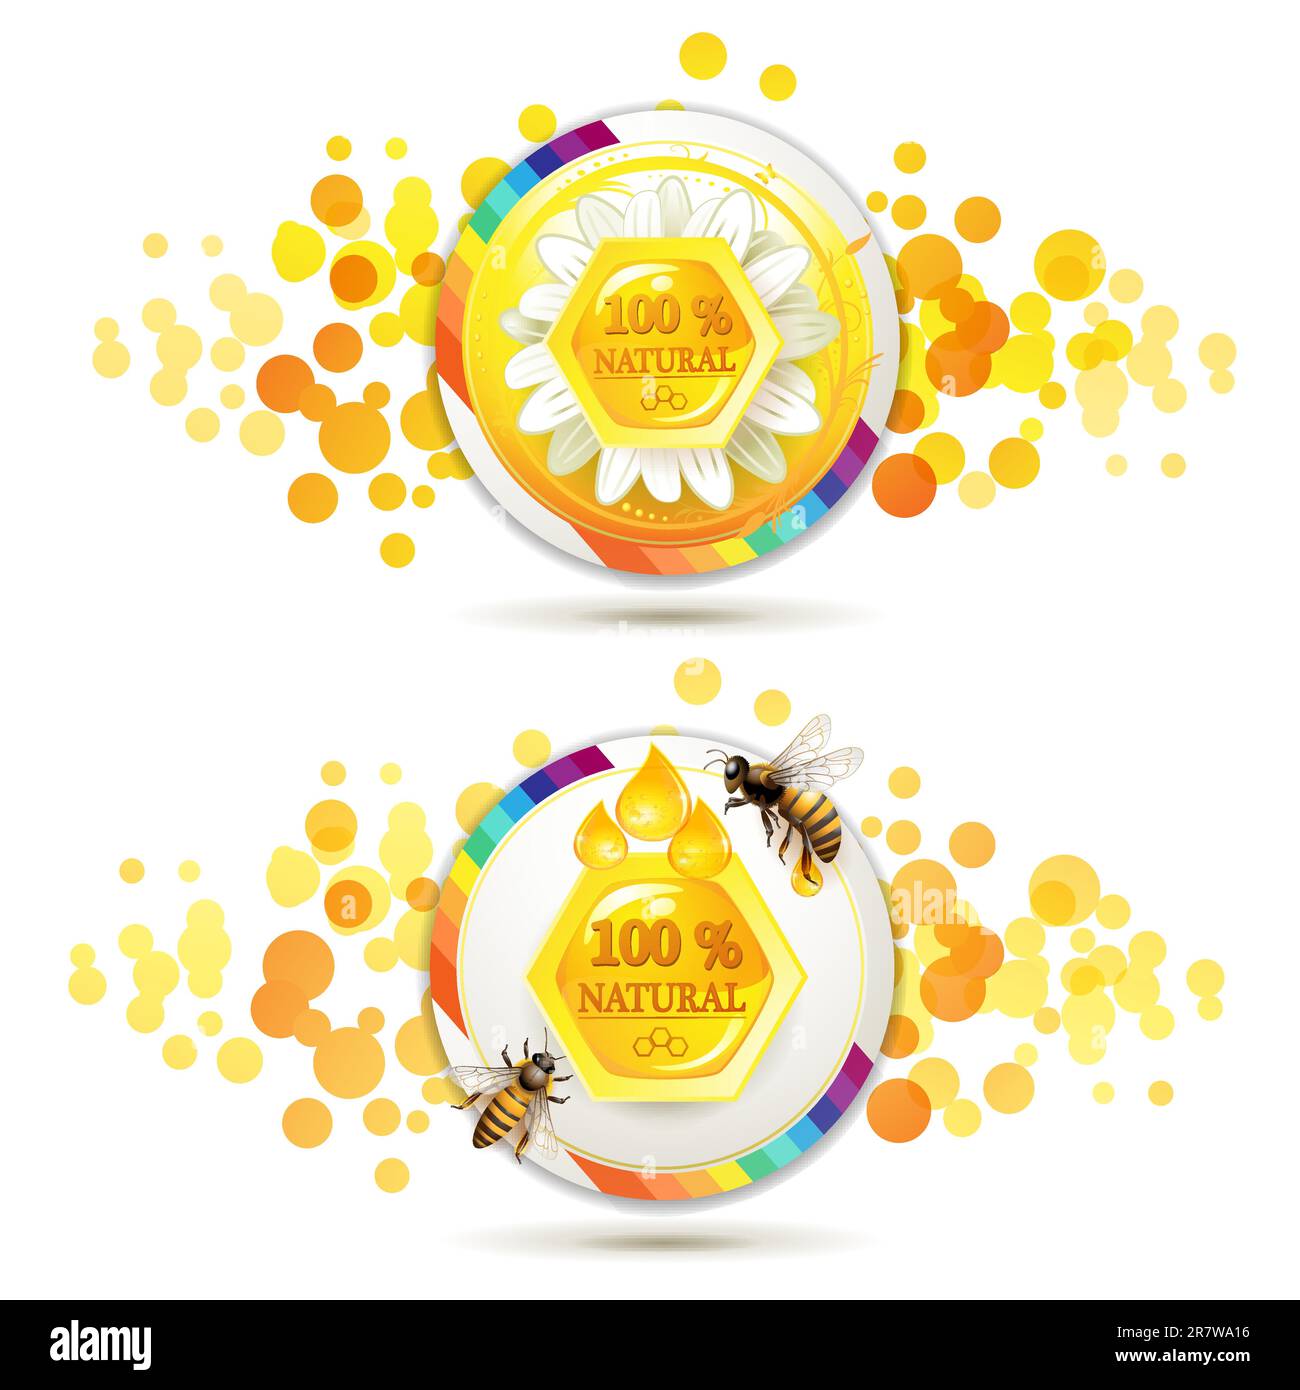 Bees and honeycombs over design shape background Stock Vector